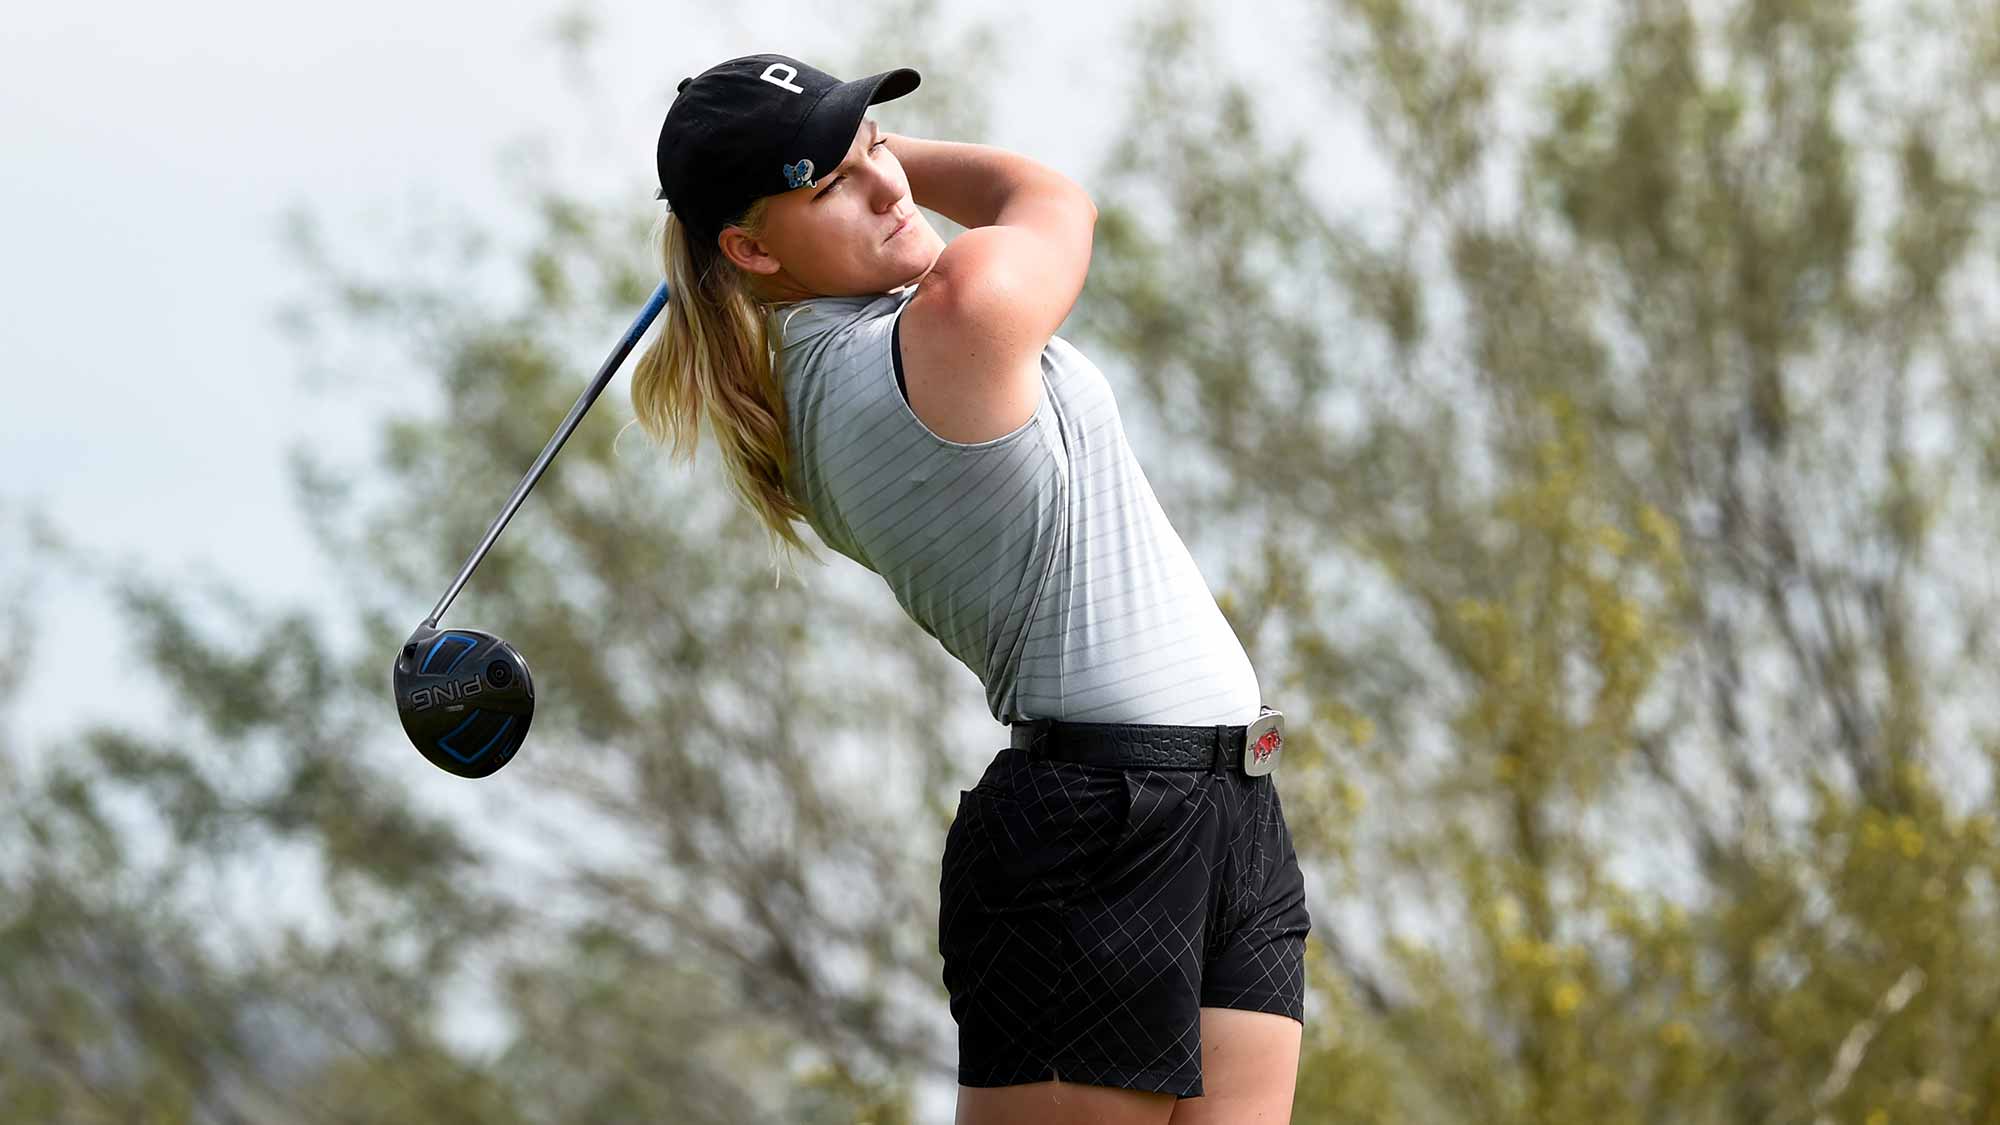  Alana Uriell hits her drive on the 18th hole during the first round of the Bank of Hope Founders Cup at the Wildfire Golf Club on March 21, 2019 in Phoenix, Arizona